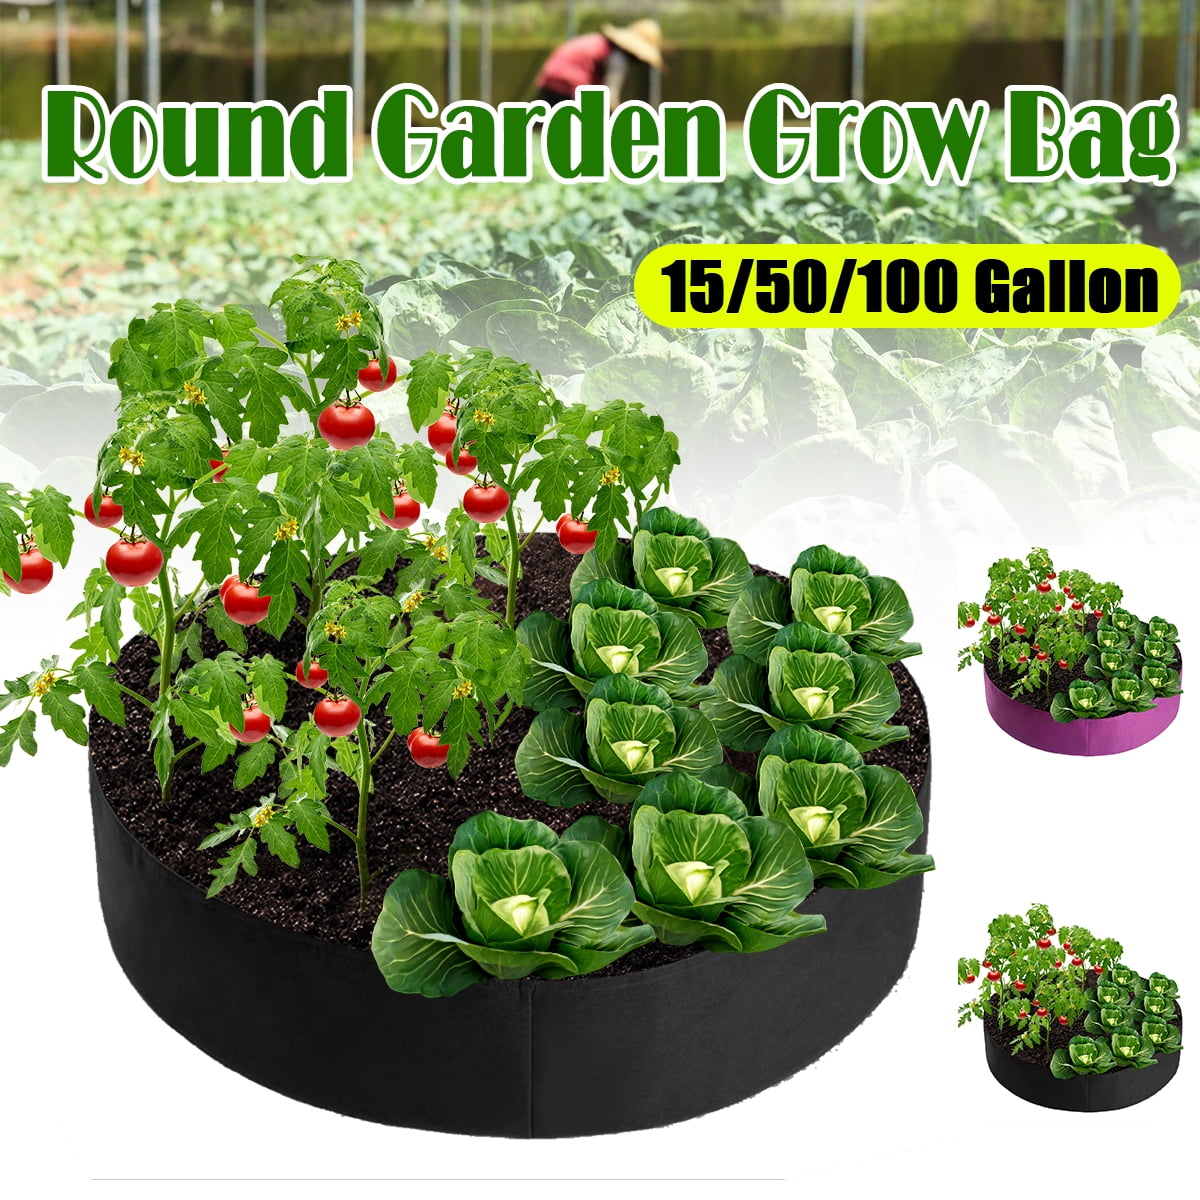 Details about   Fabric Raised Bed Garden Planting Flower Planter Elevated Vegetable Grow Bag US 